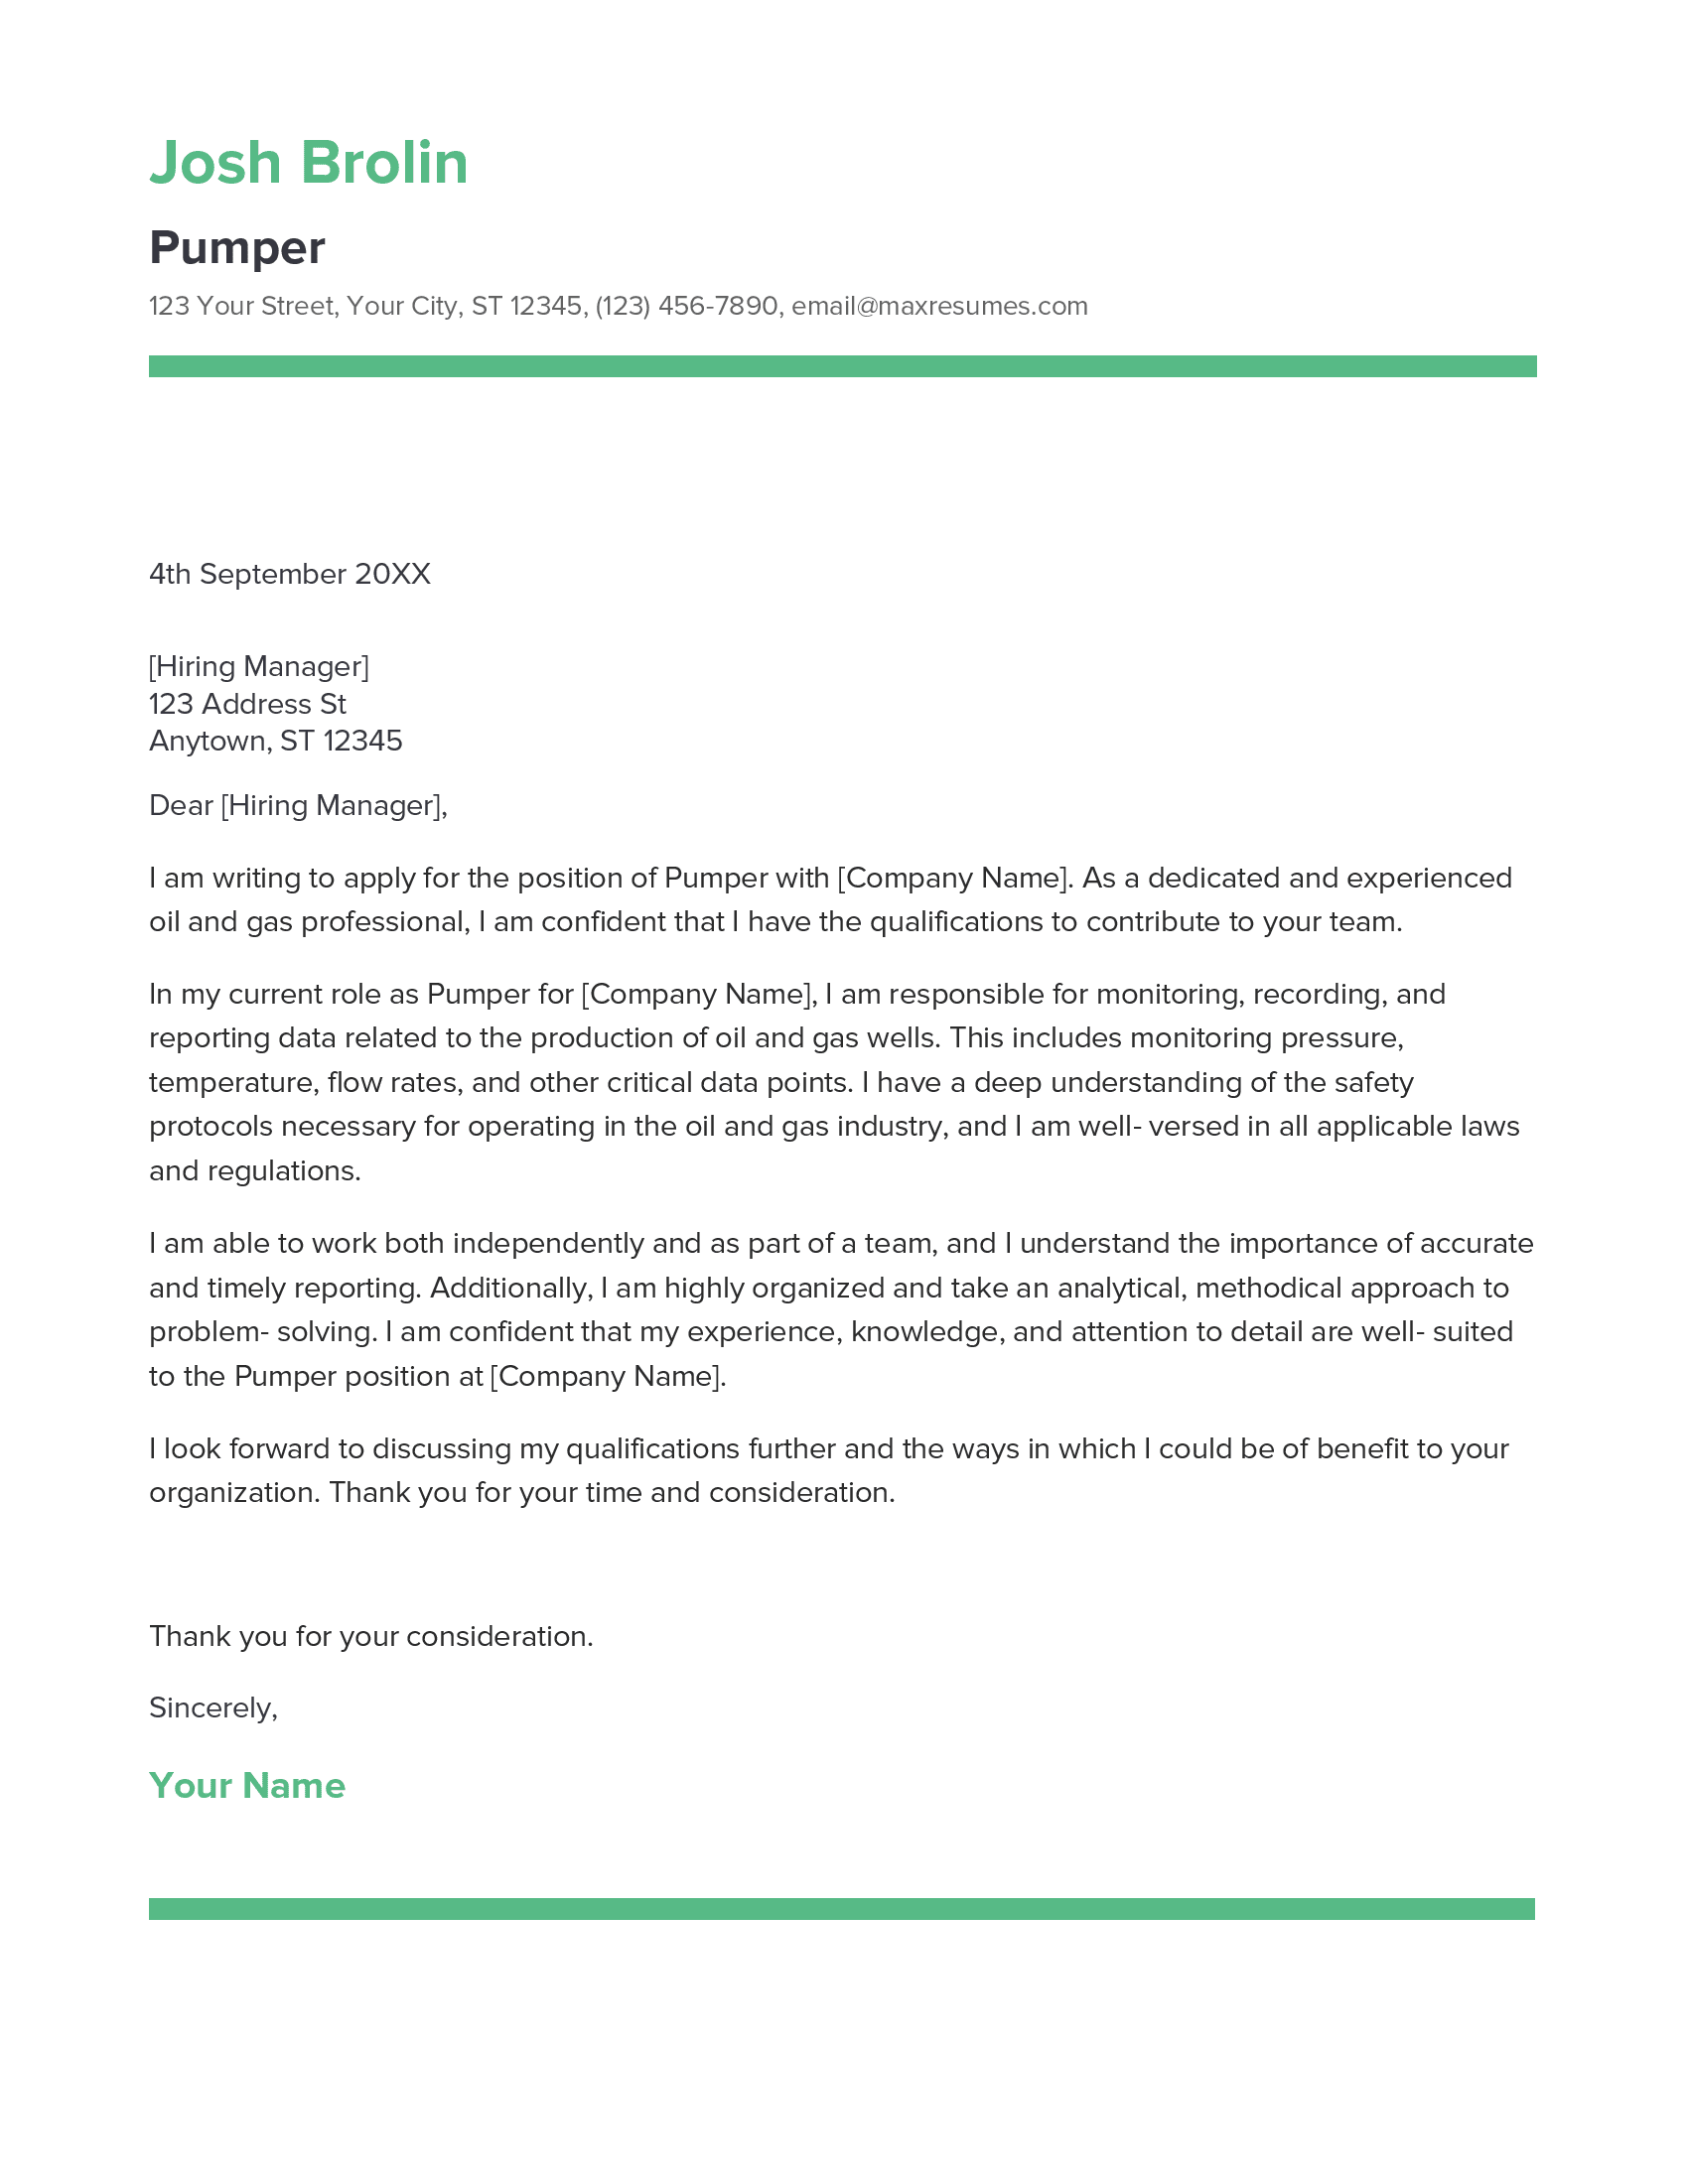 Pumper Cover Letter Example